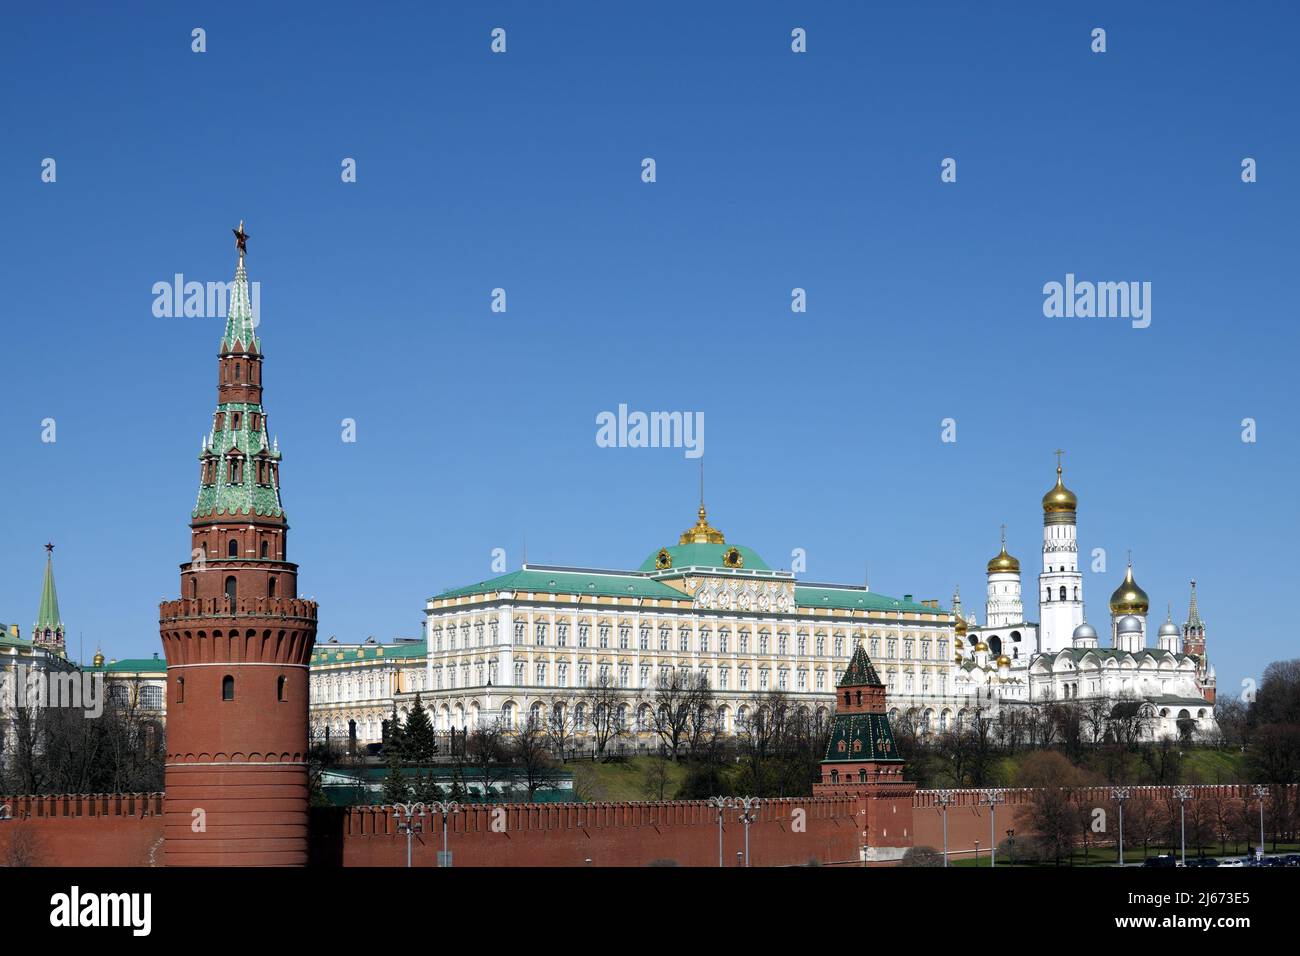 Vodovzvodnaya tower, Grand Kremlin Palace and Ivan the Great Bell Tower of Moscow Kremlin behind the wall on embankment ot the Moscow river on bright Stock Photo